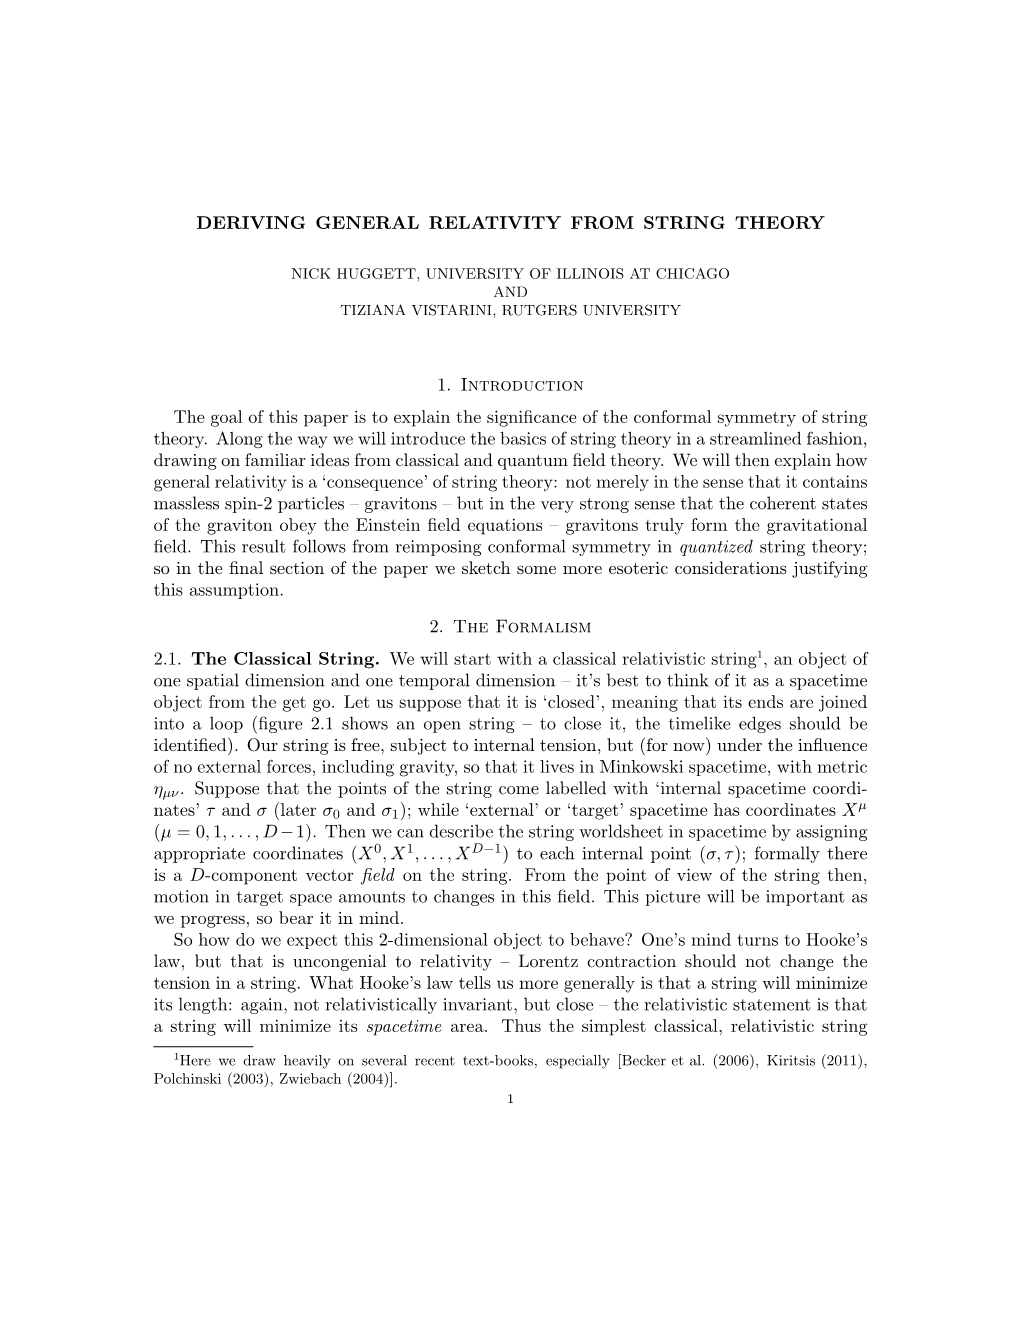 DERIVING GENERAL RELATIVITY from STRING THEORY 1. Introduction the Goal of This Paper Is to Explain the Significance of the Conf